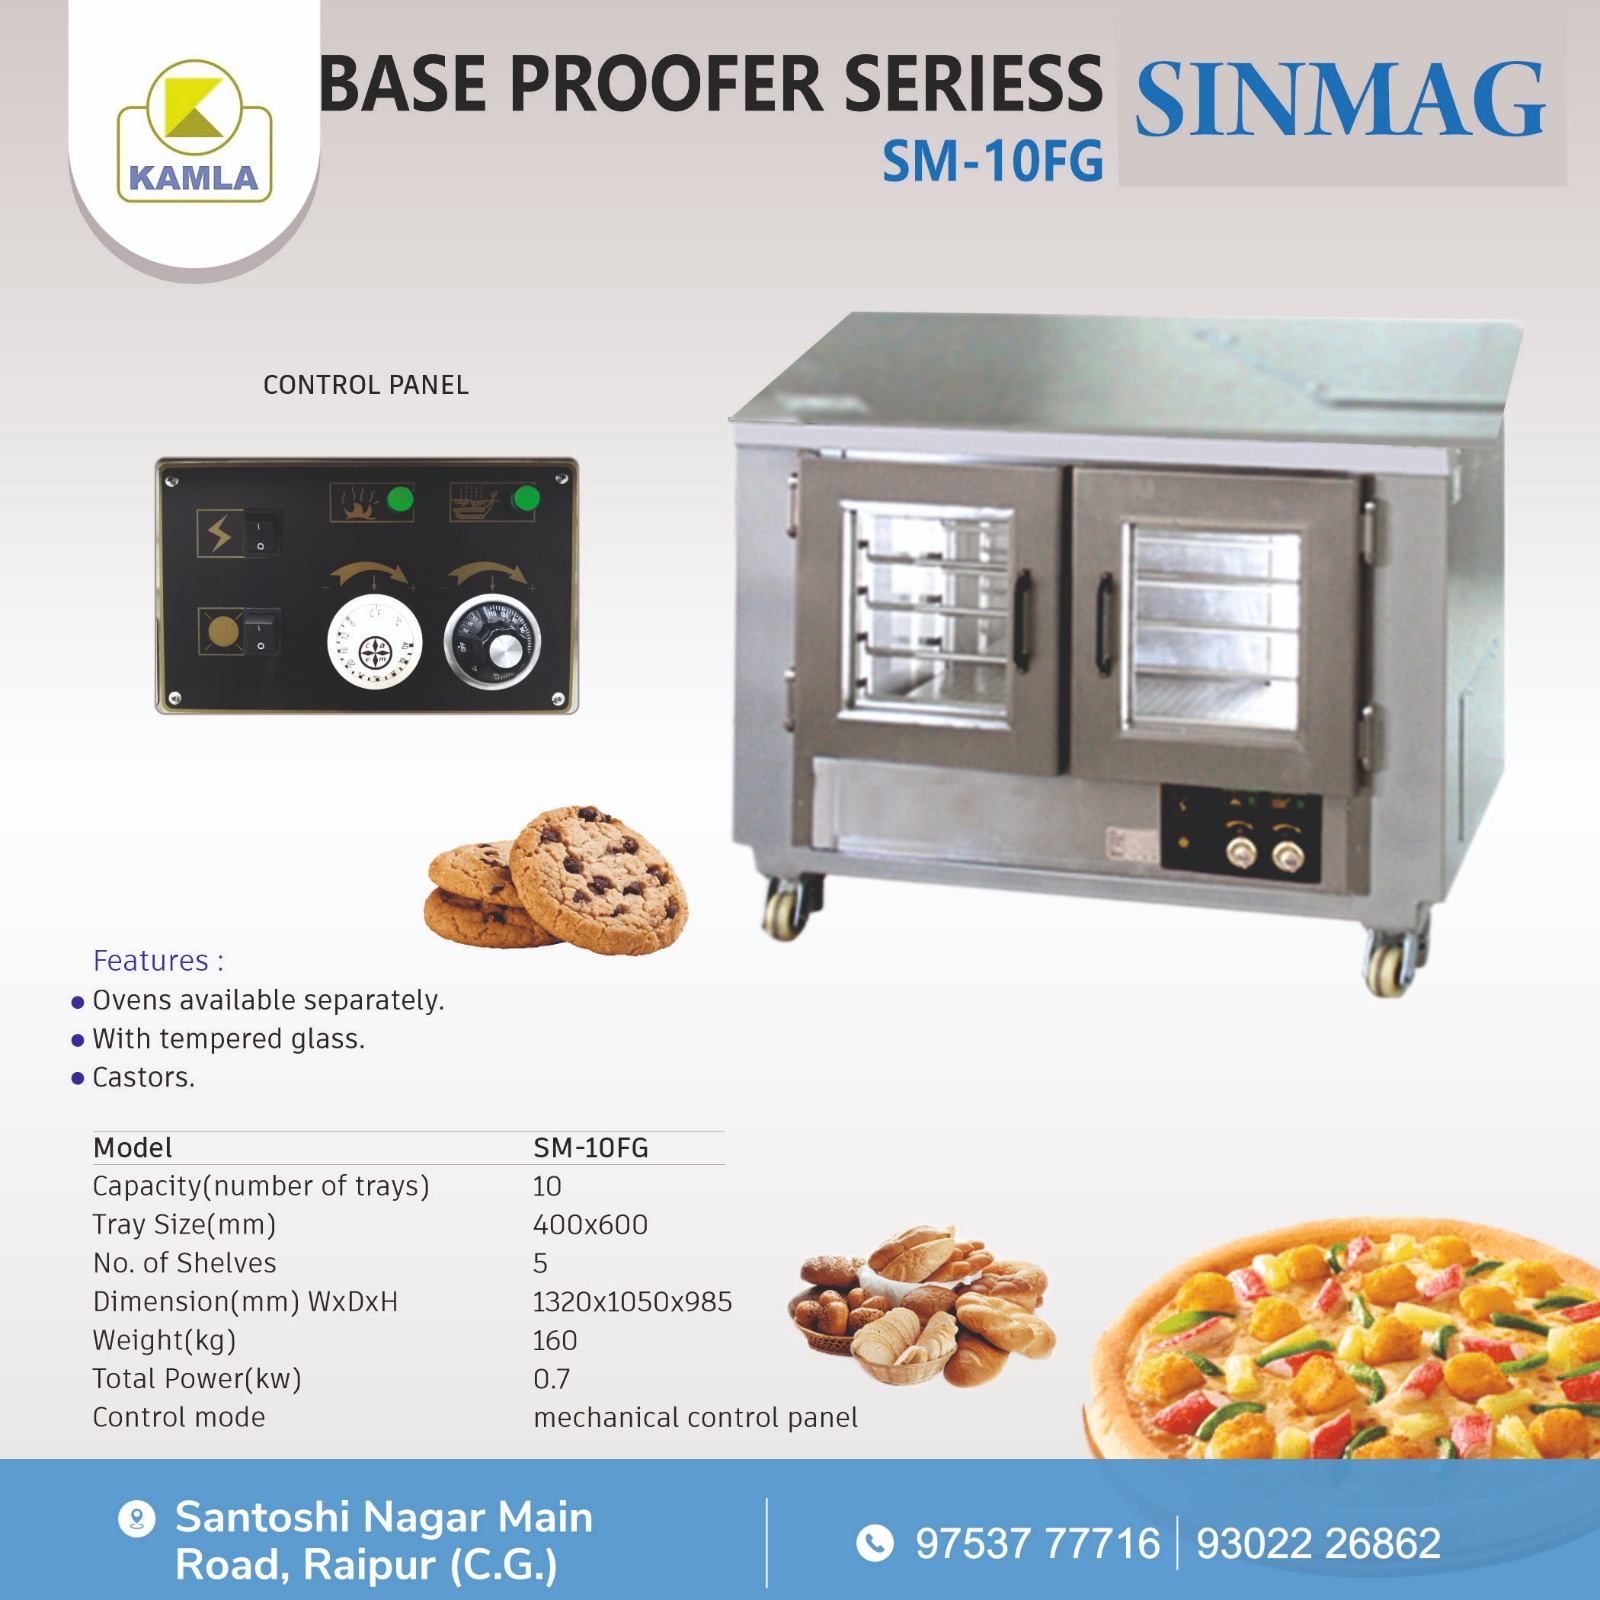 Sinmag Single Base Proofer SM-10FG with oven and 5 shelves